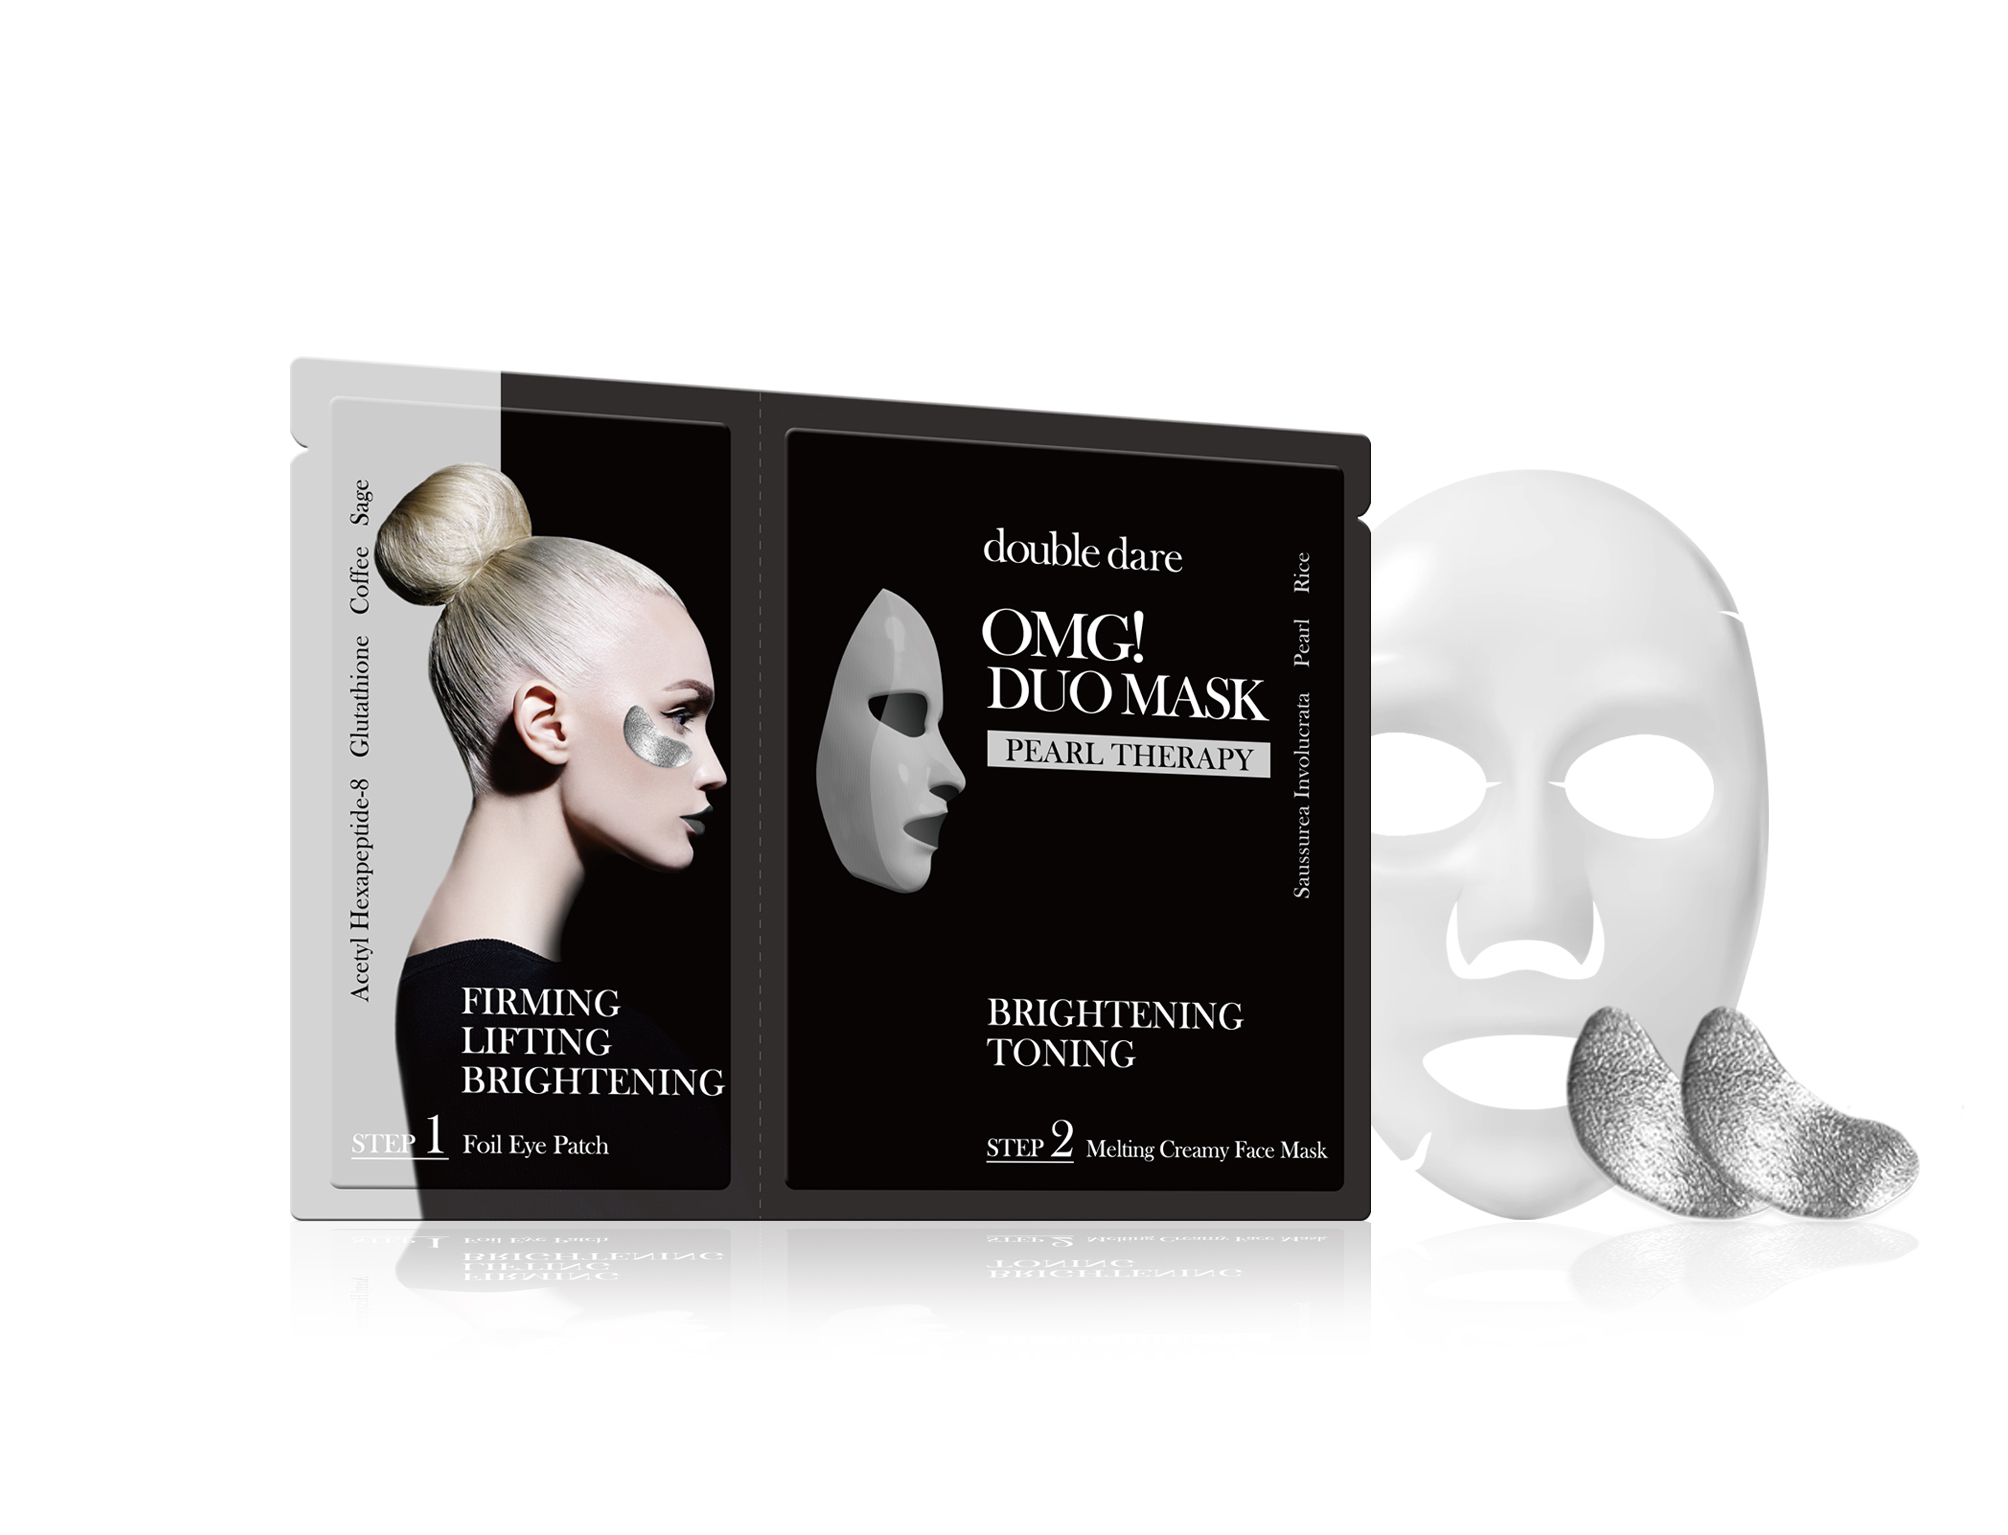 [double dare] OMG! Duo Mask Pearl 25g